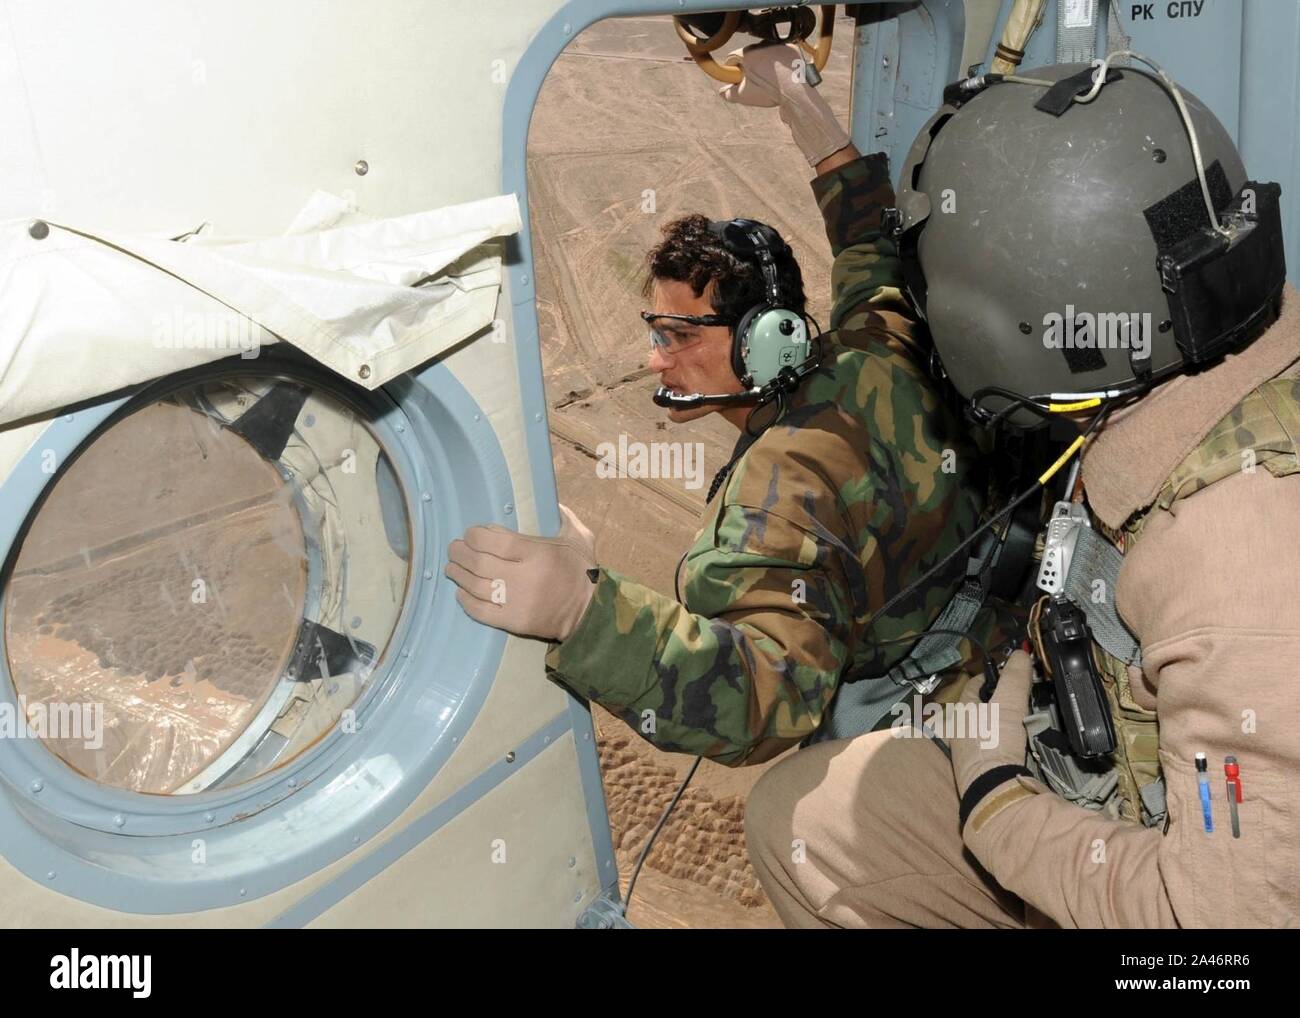 First flight a success for future Afghan Flying Air Crew Chiefs Stock Photo